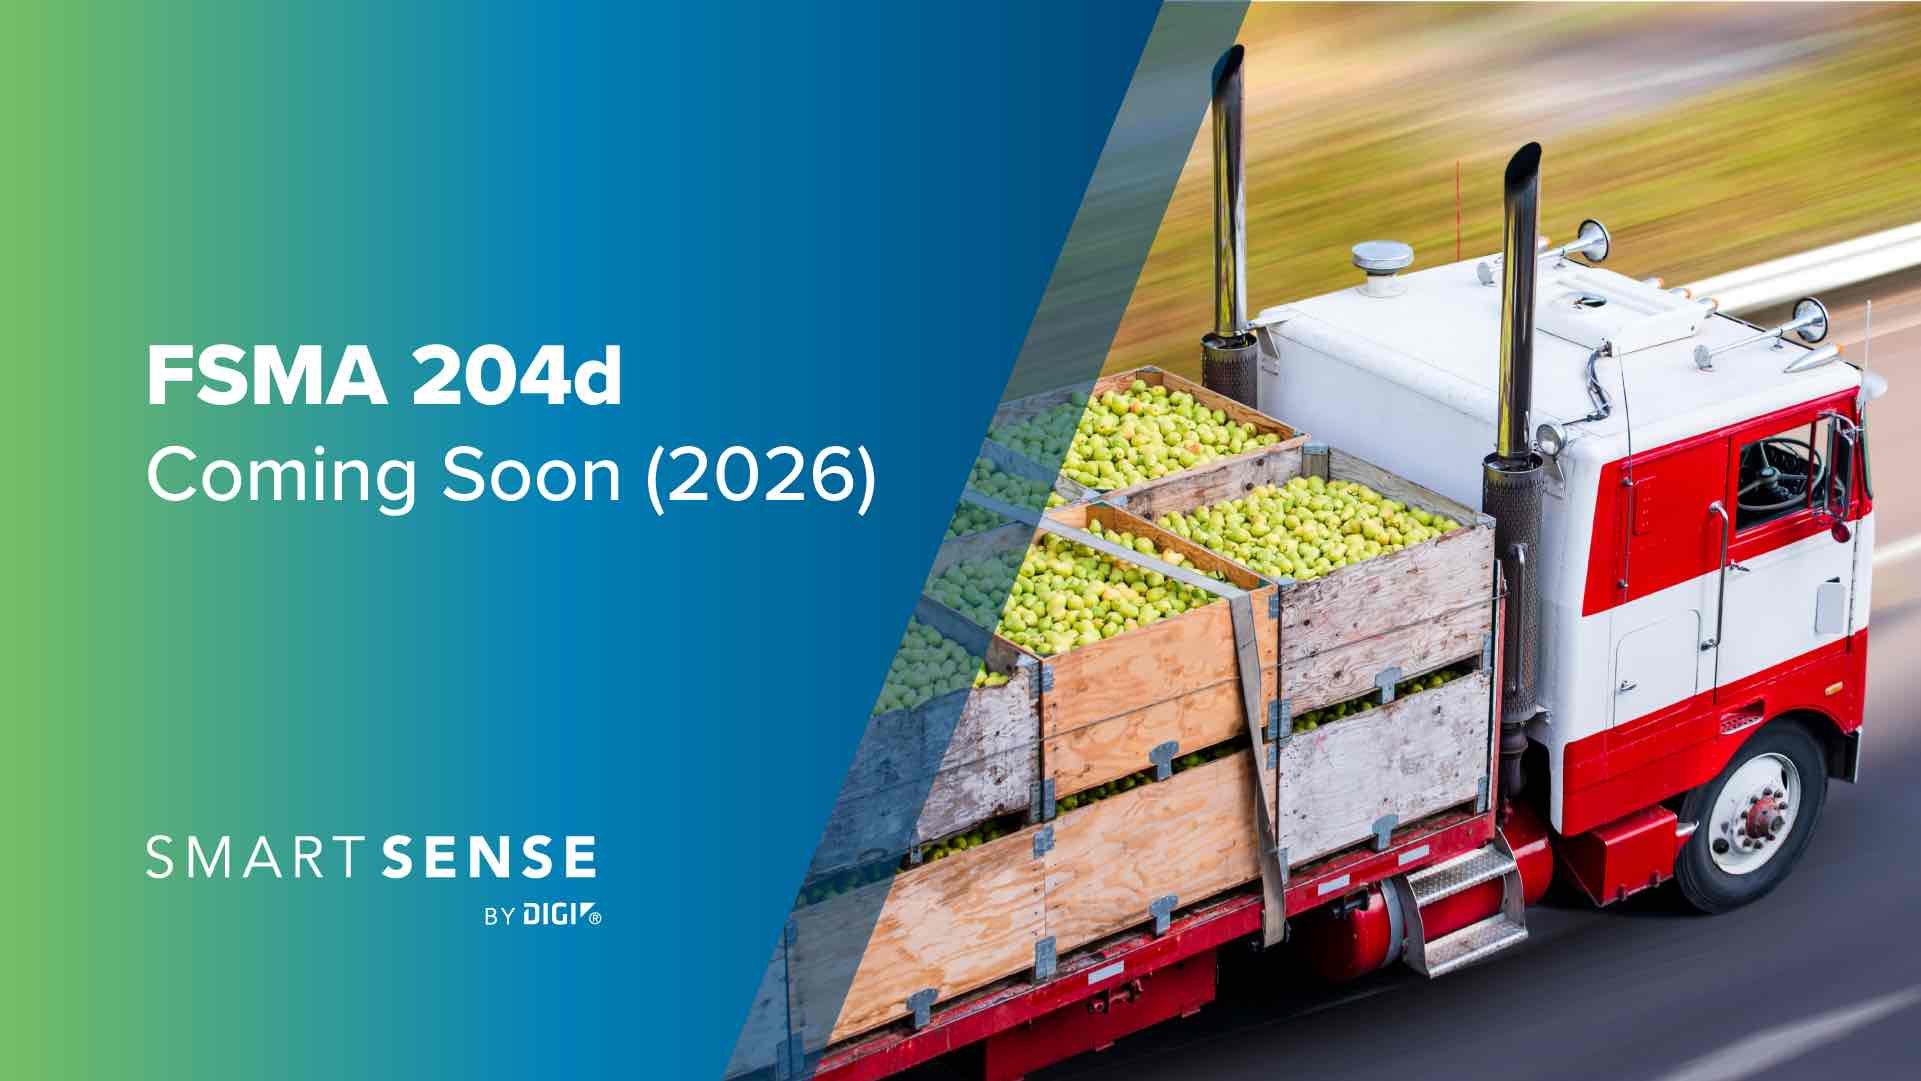 FSMA 204d is coming soon (2026) 